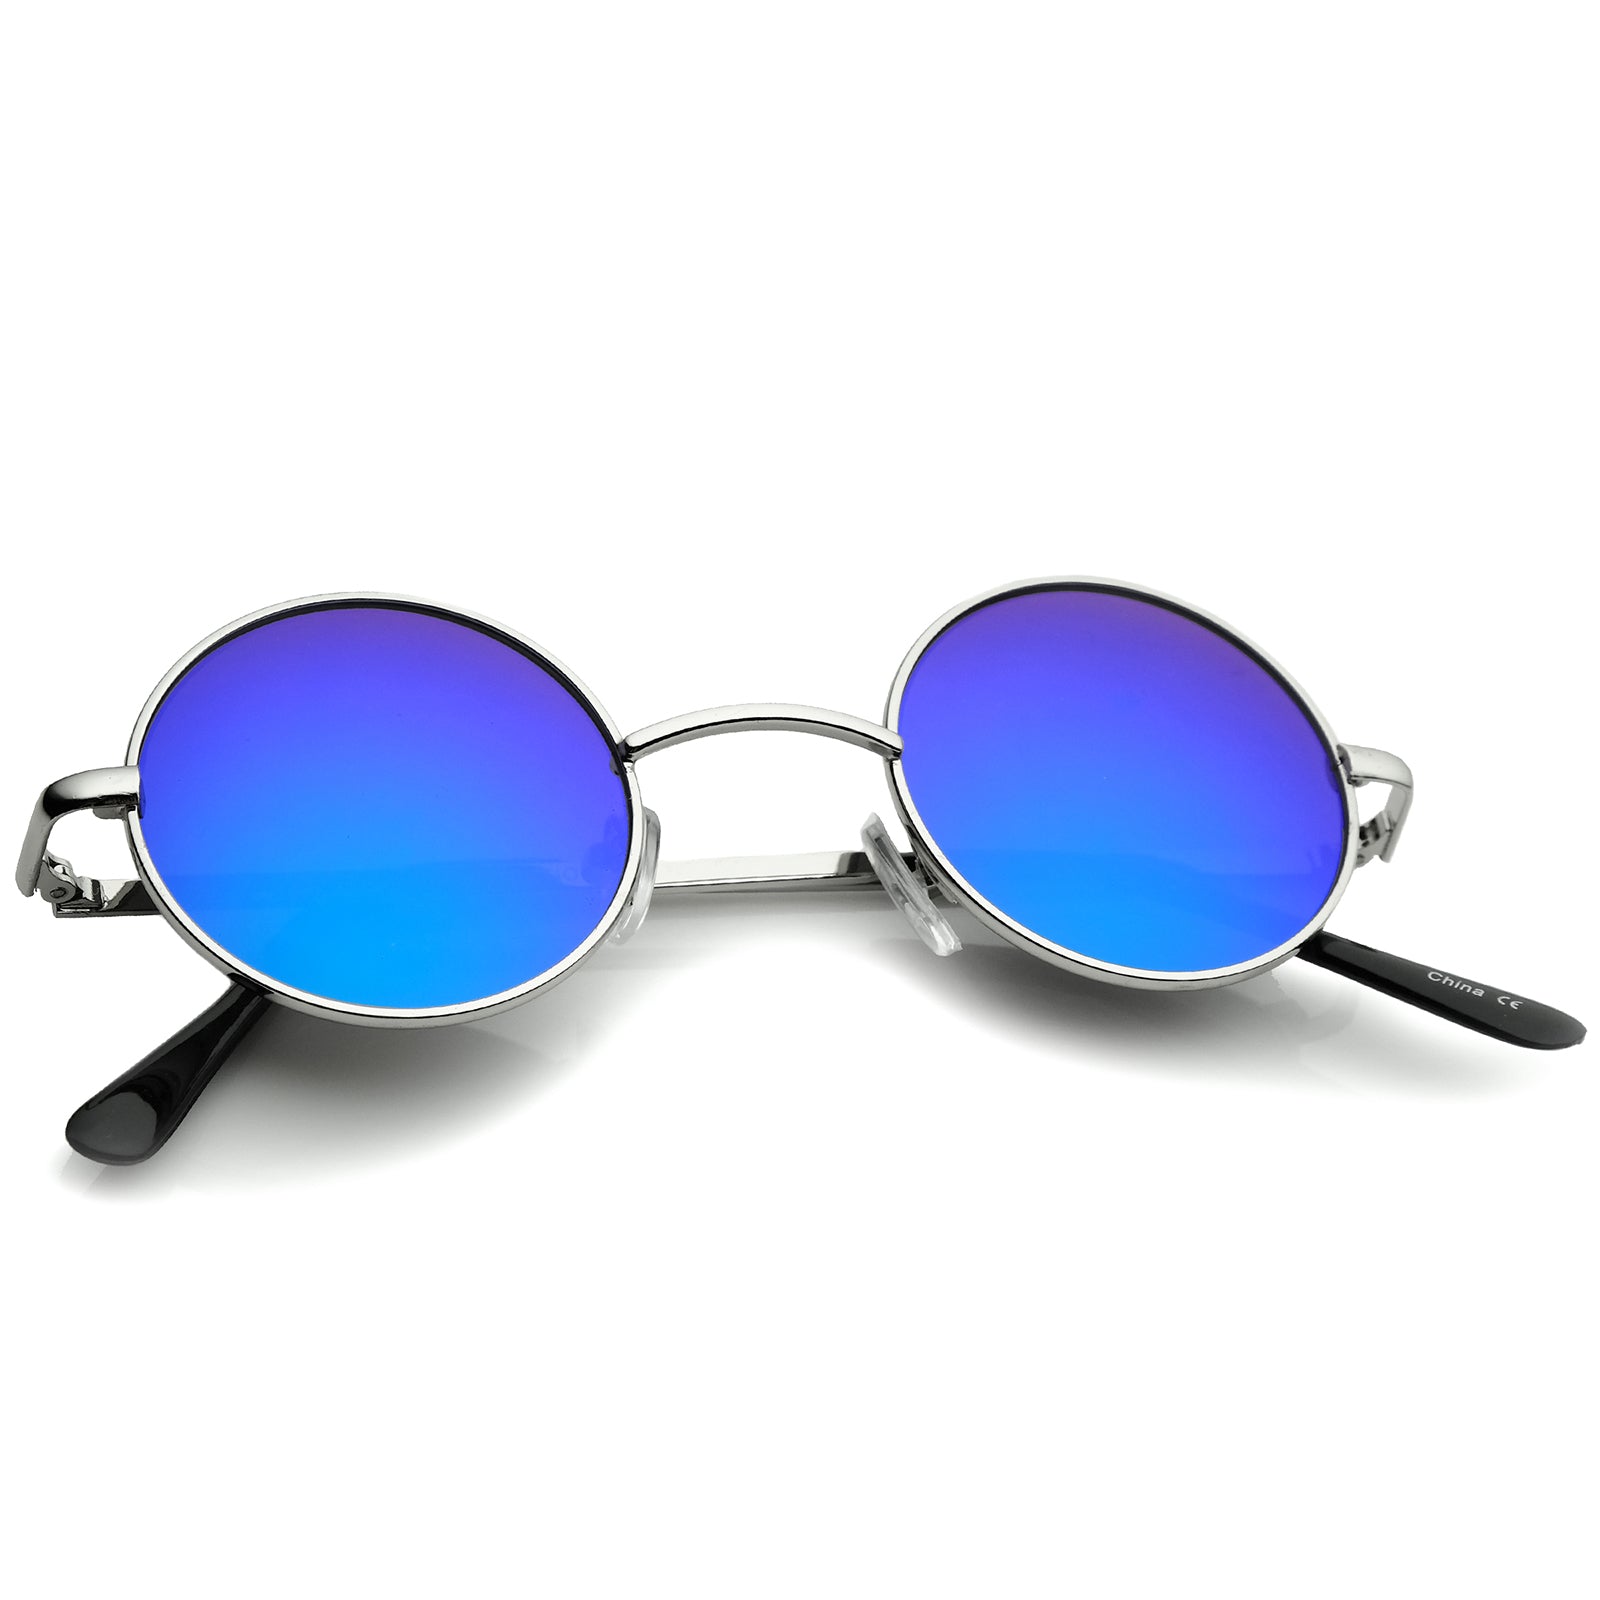 Buy COASION Vintage Round Metal Sunglasses John Lennon Style Small Unisex Sun  Glasses (Gold Frame/Grey Lens) at Amazon.in